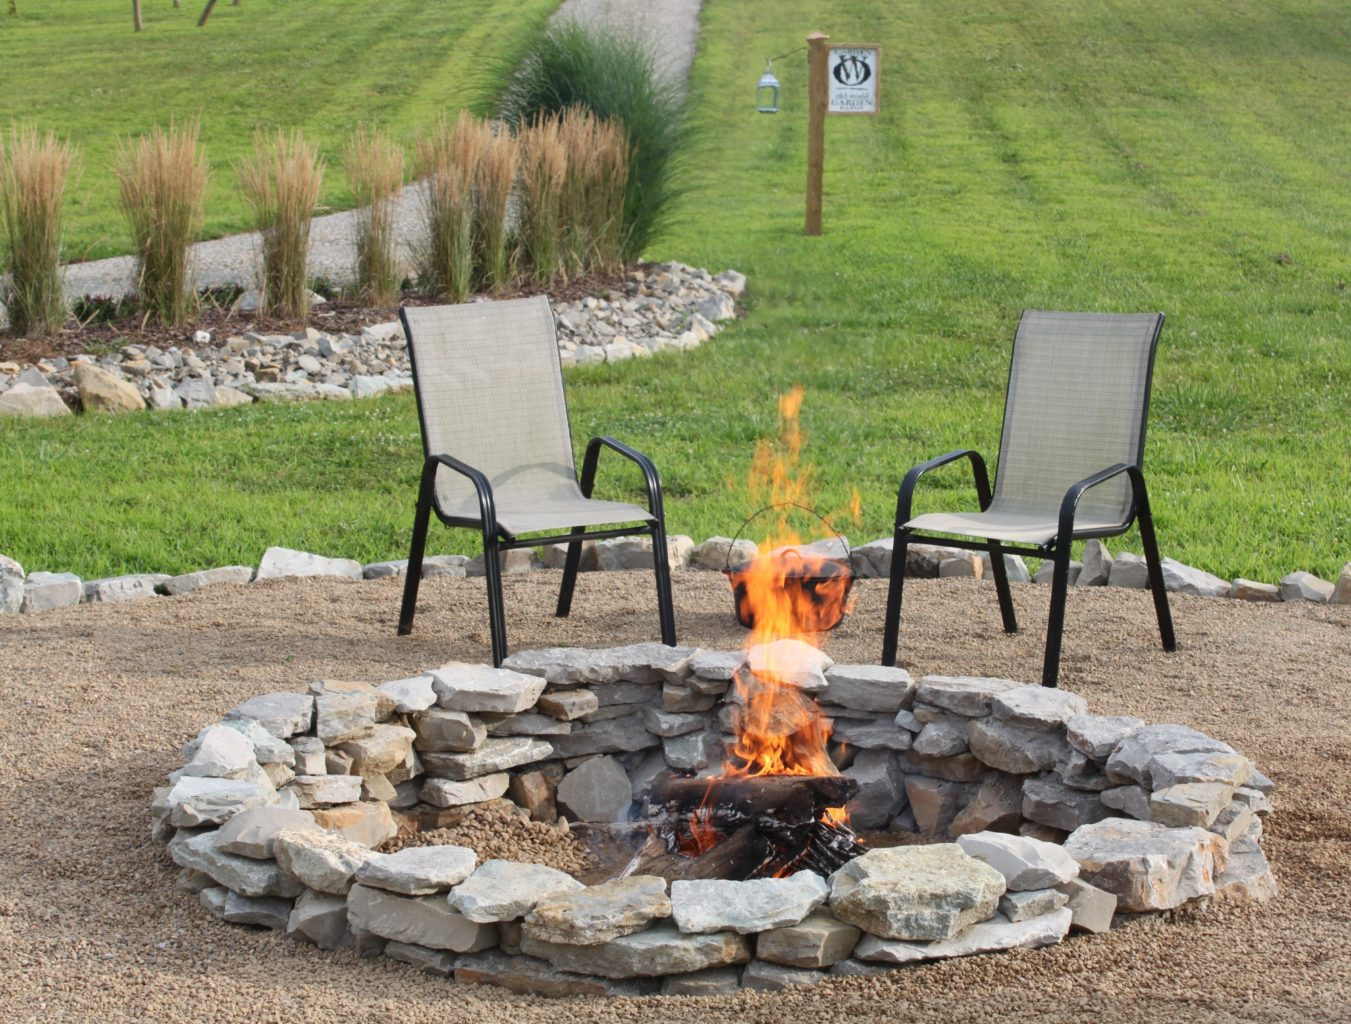 Building A Backyard Firepit
 The pleted Stone Fire Pit Project How We Built It for